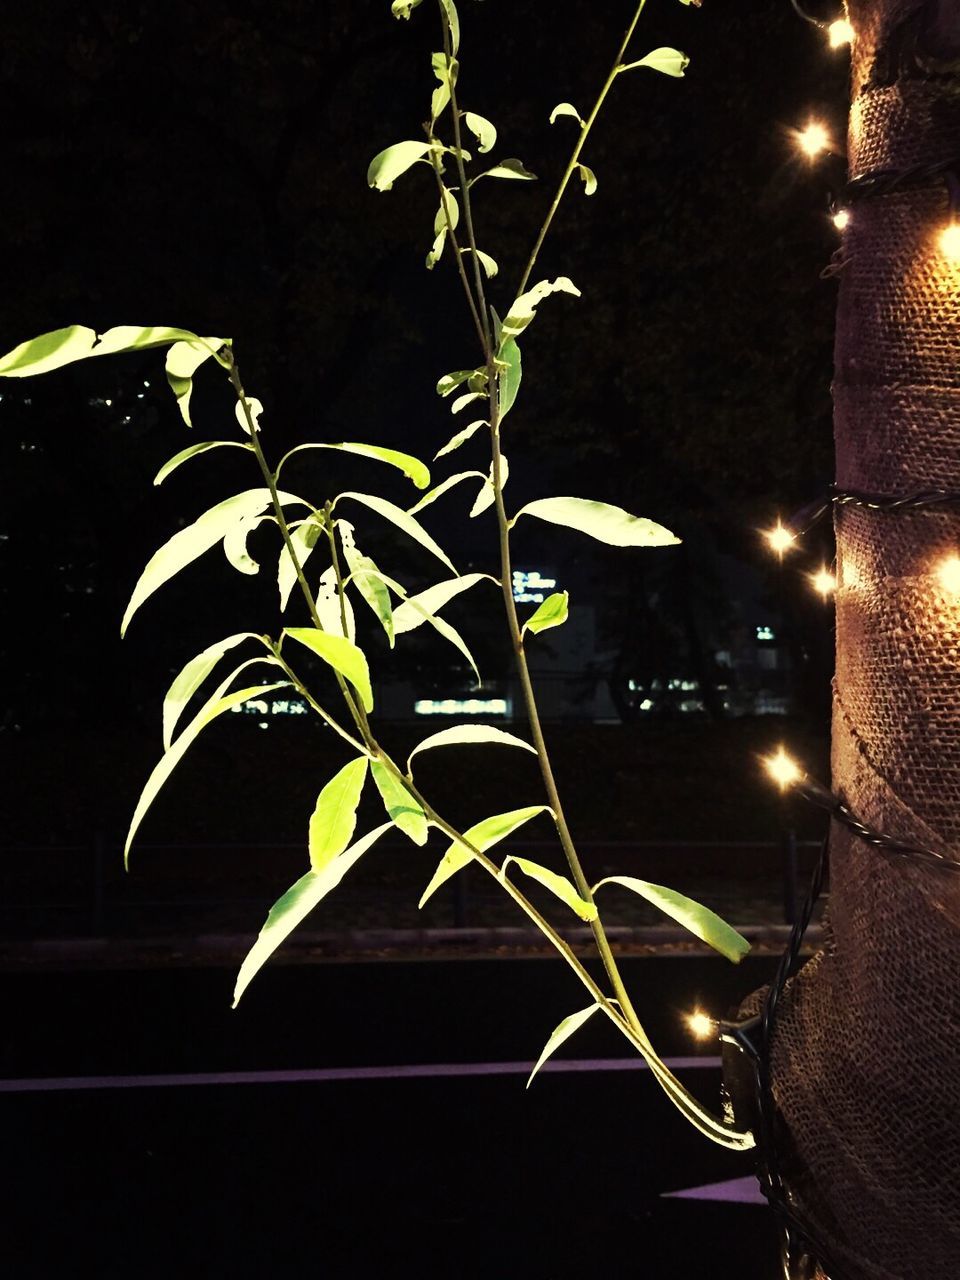 leaf, night, growth, green color, plant, illuminated, nature, close-up, sunlight, branch, tree, potted plant, no people, dark, outdoors, focus on foreground, leaves, shadow, growing, light - natural phenomenon